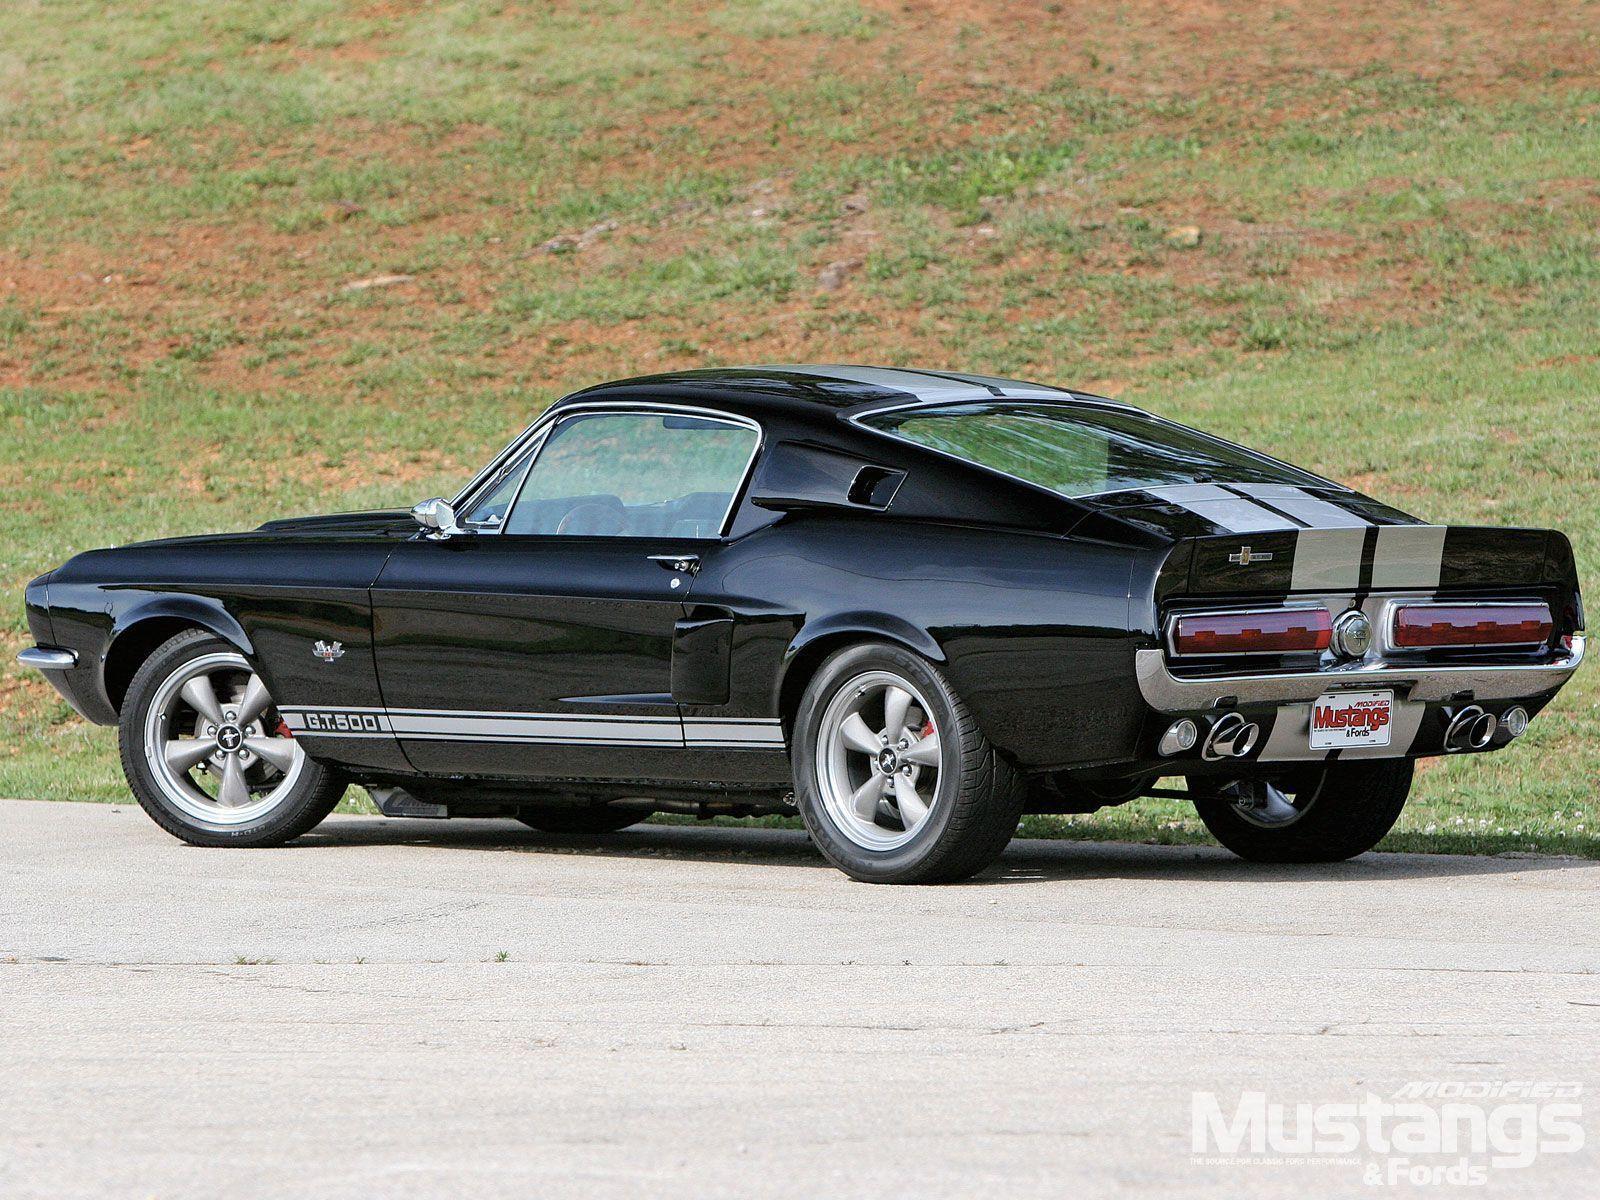 Ford Mustang 1967 Shelby GT500 Wallpaper. Wal Wallpaper